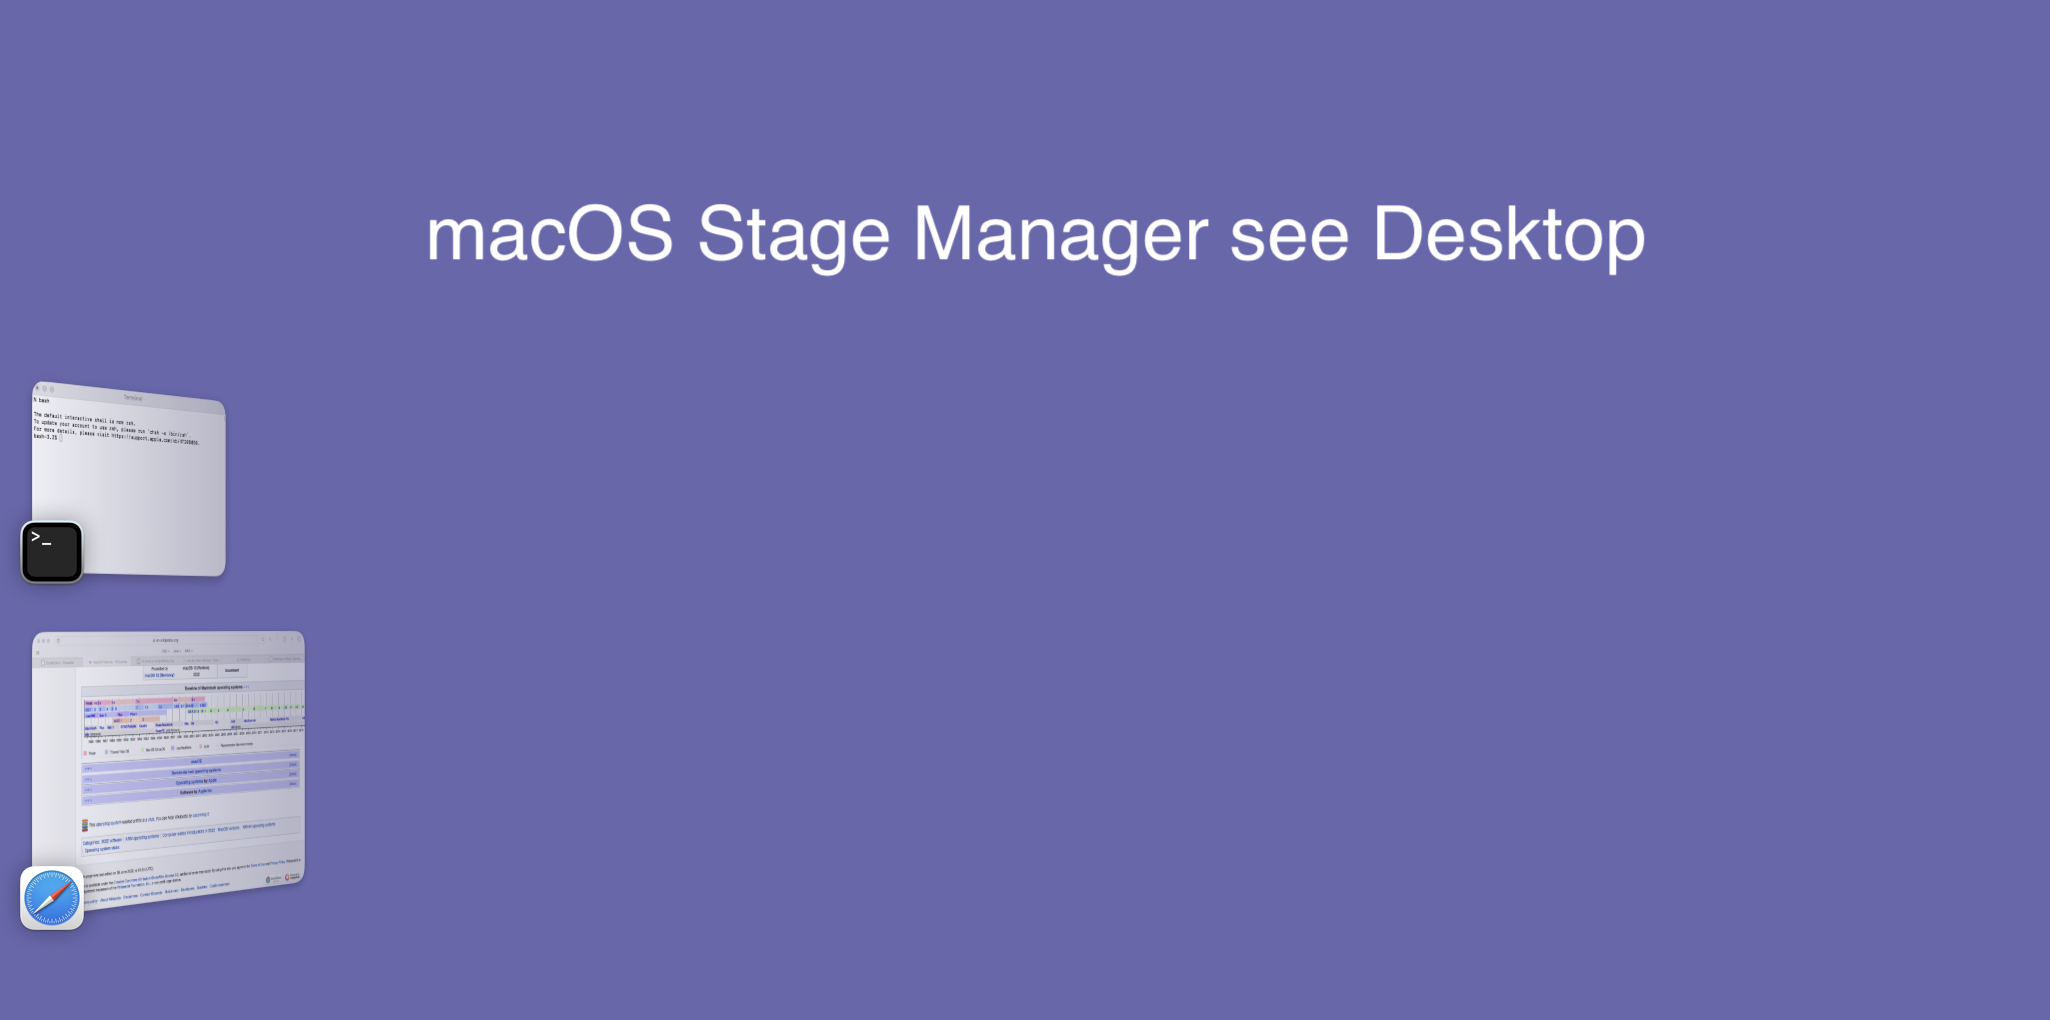 macOS Stage Manager see the Desktop